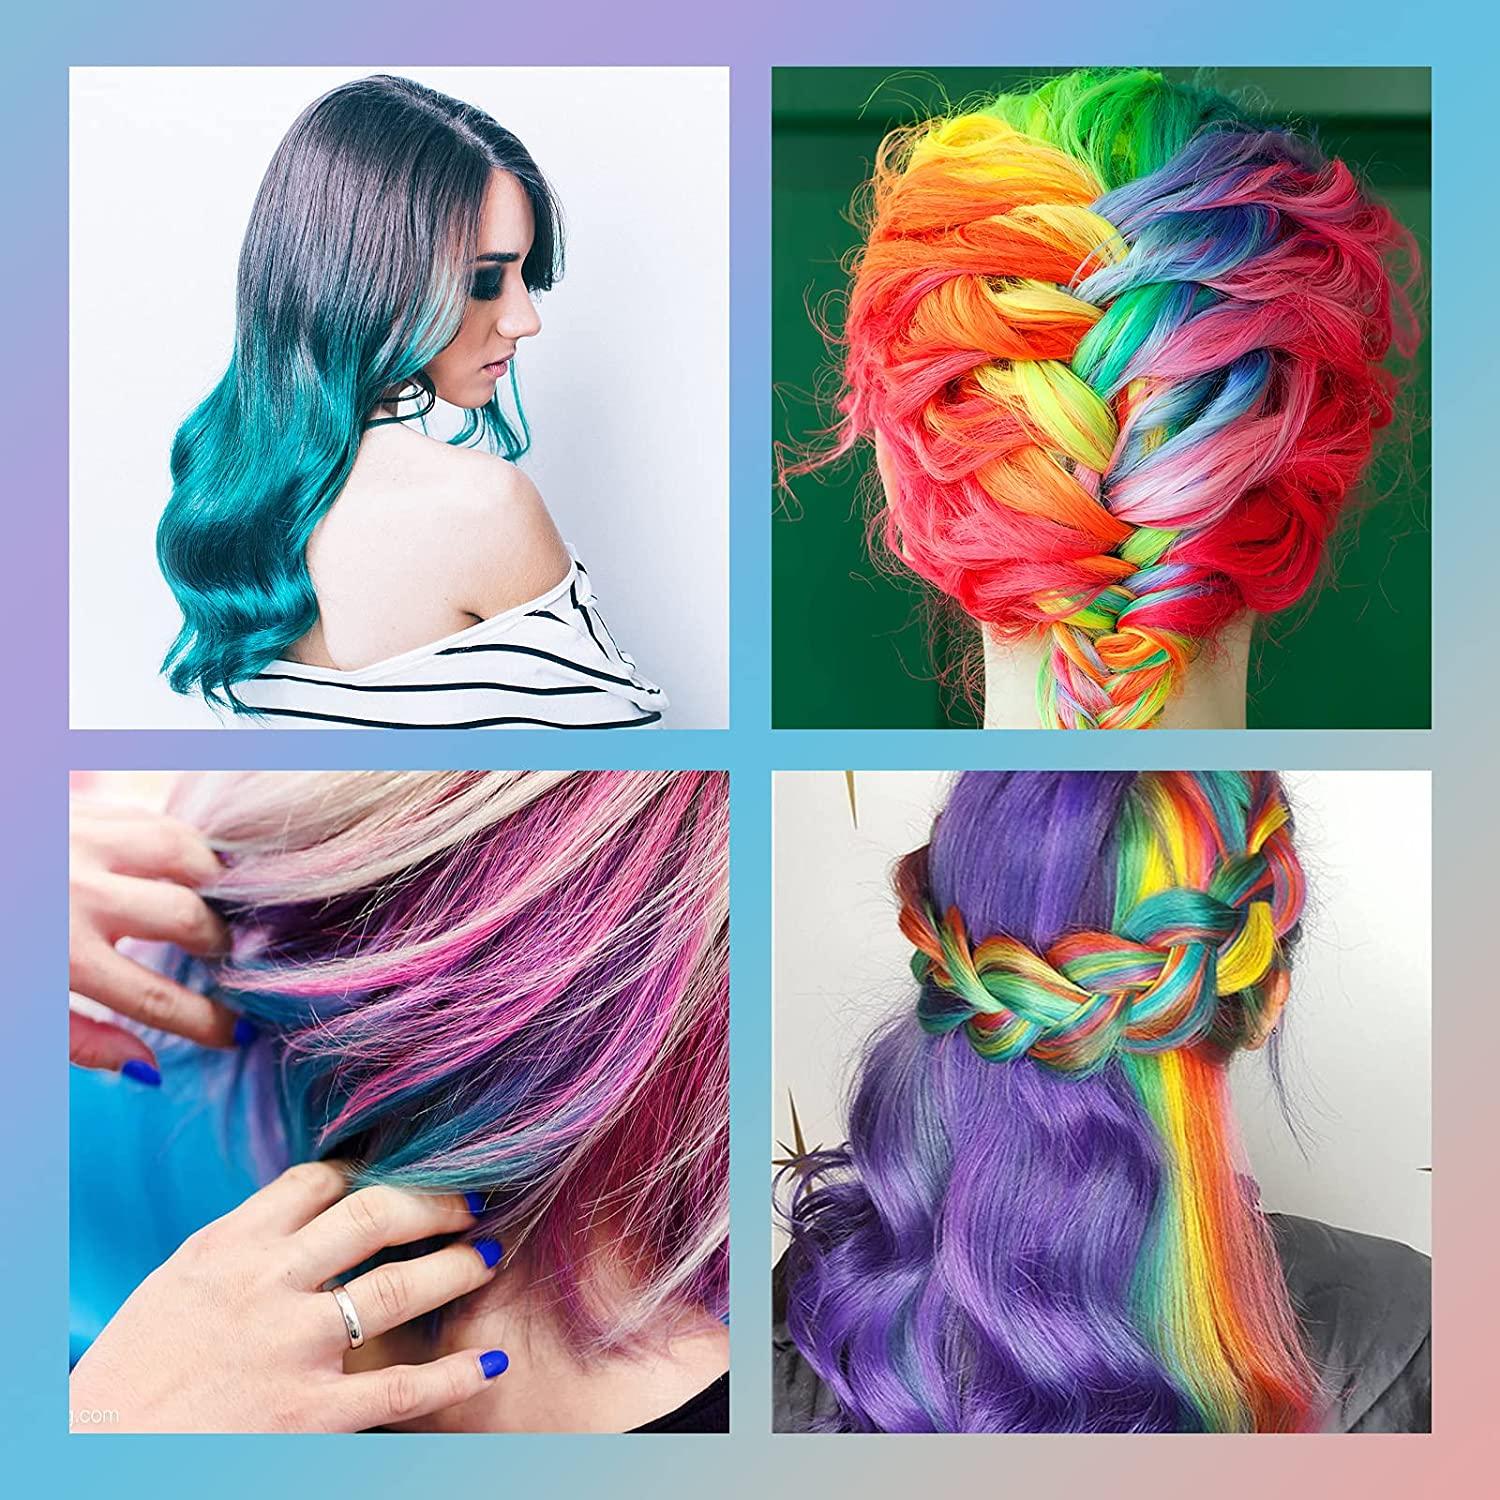 boys with colorful hair